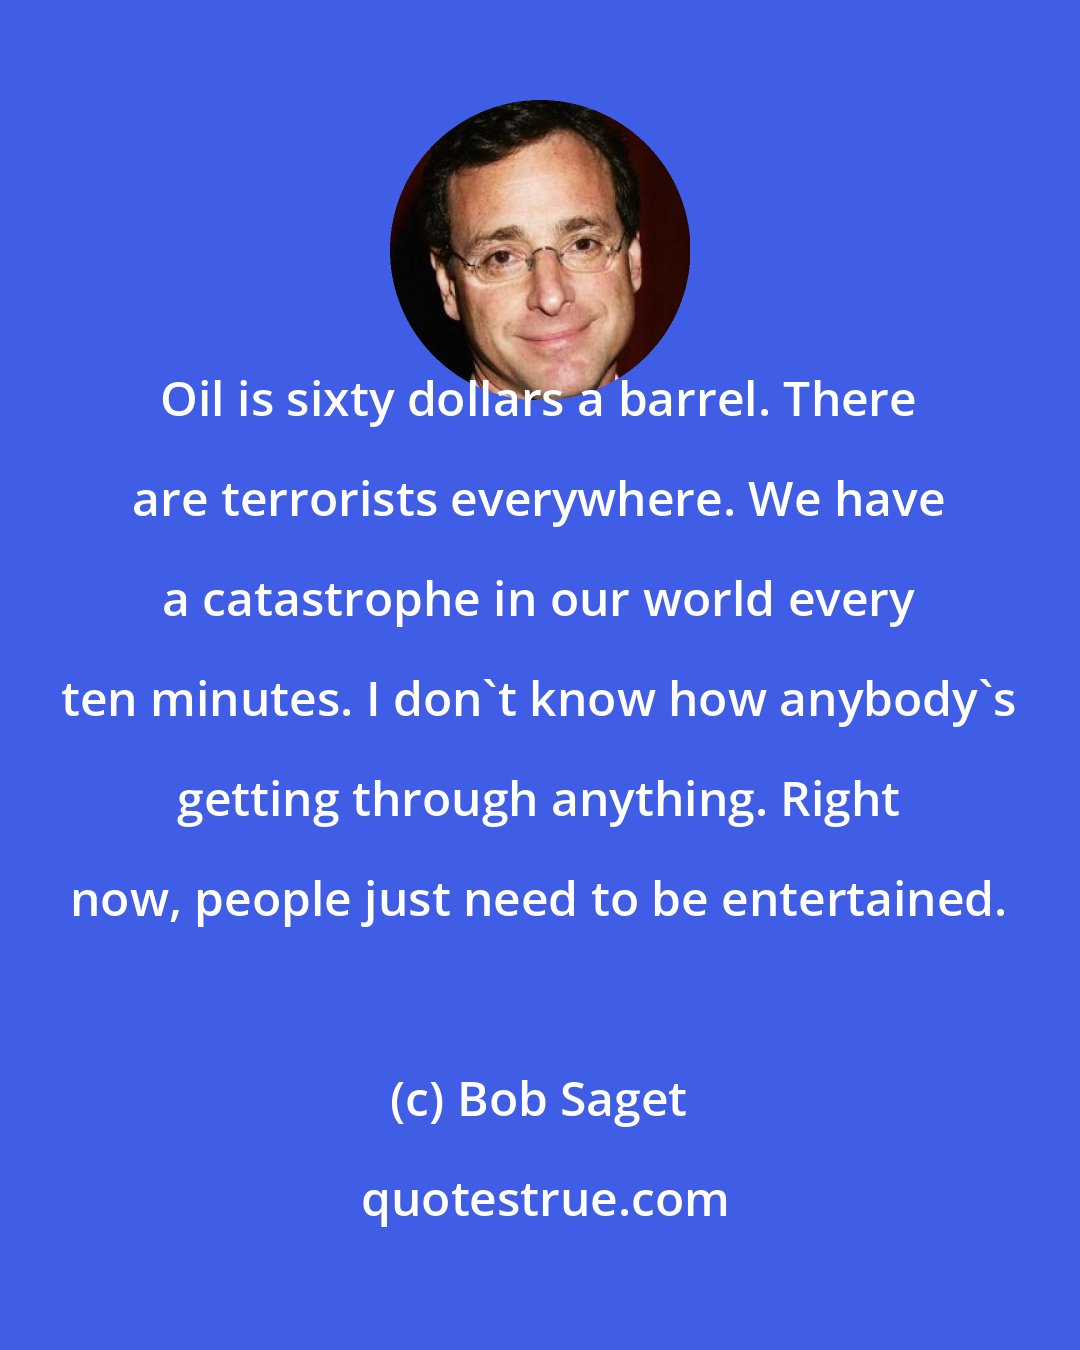 Bob Saget: Oil is sixty dollars a barrel. There are terrorists everywhere. We have a catastrophe in our world every ten minutes. I don't know how anybody's getting through anything. Right now, people just need to be entertained.